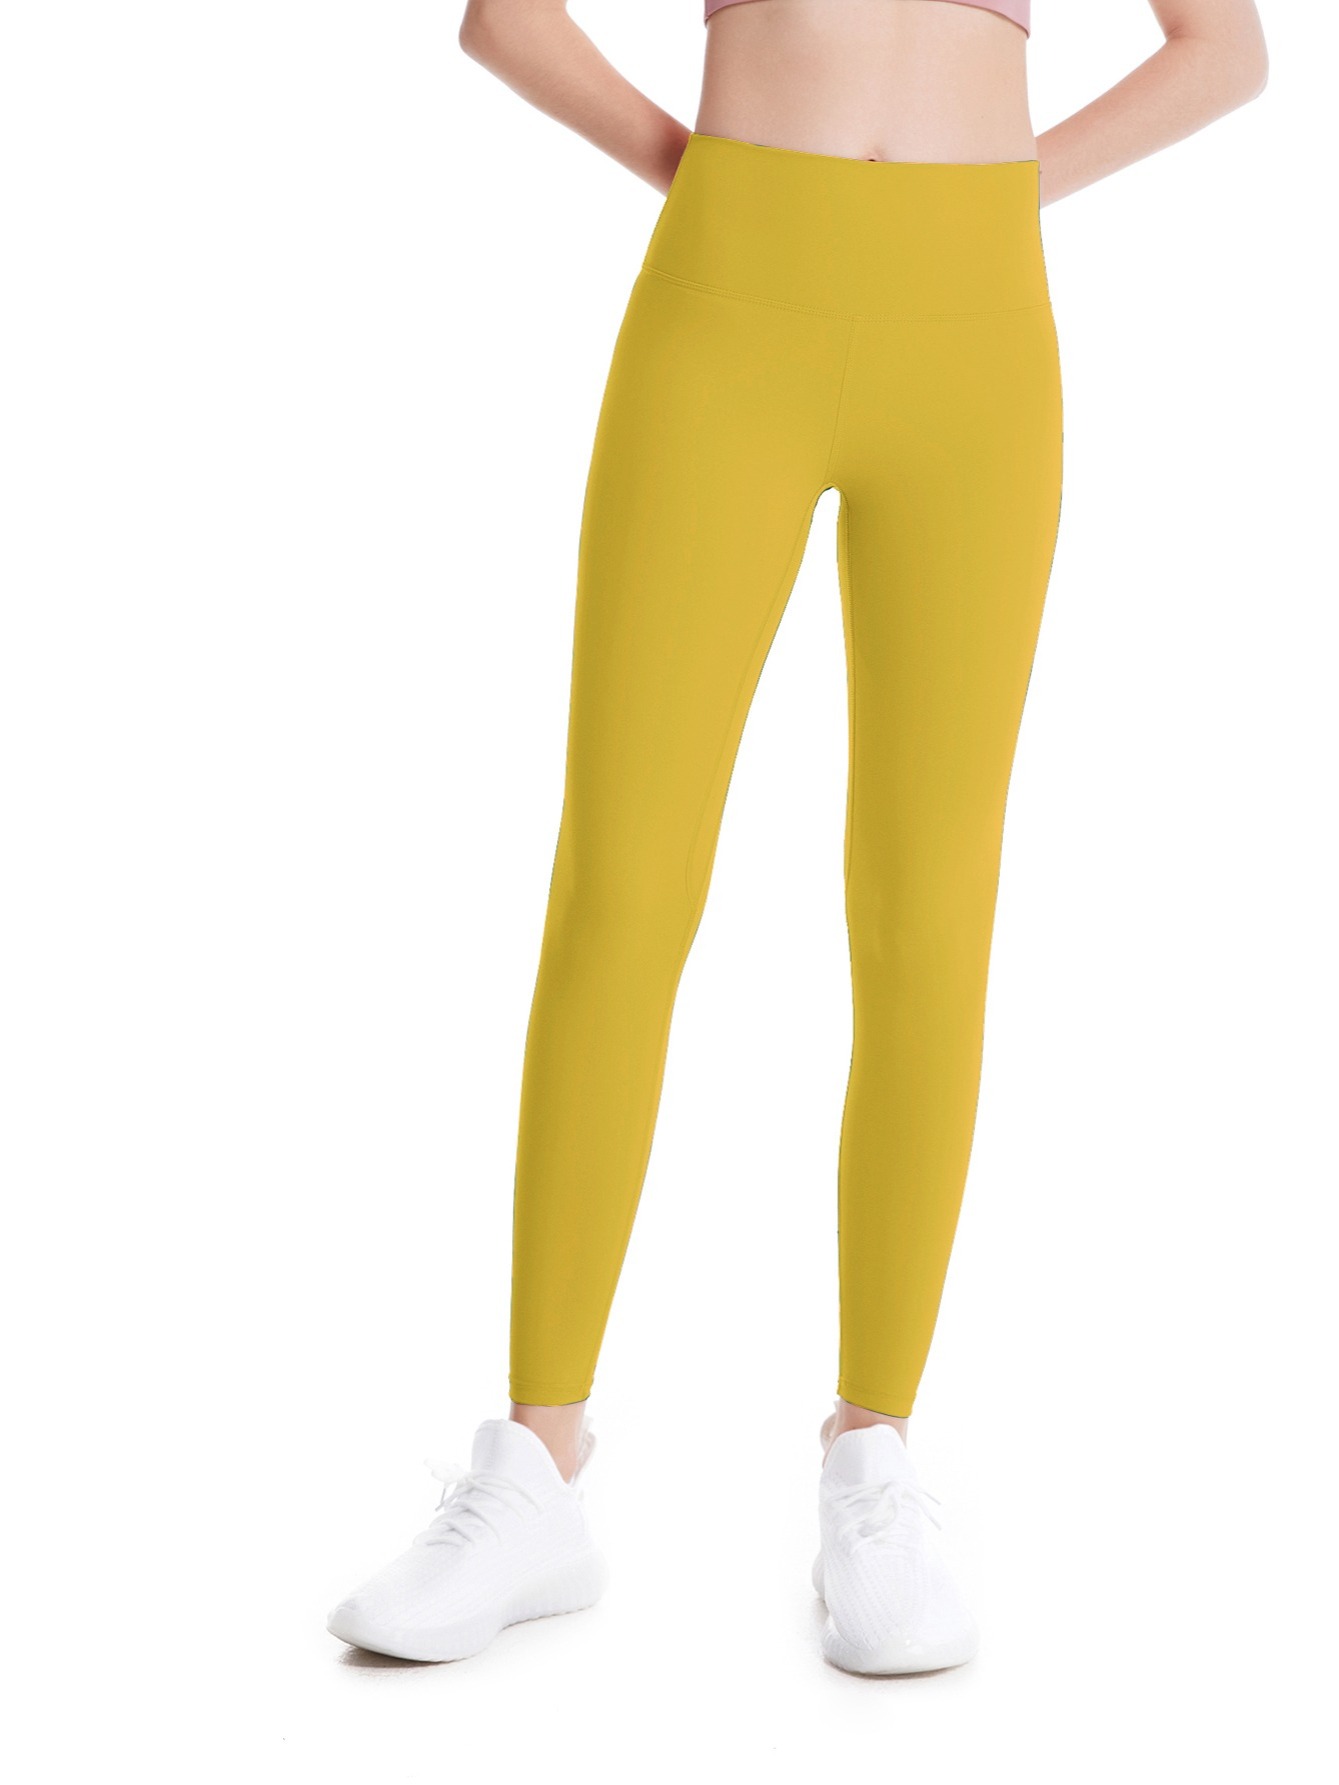 Mustard Yellow Solid Color Legging - Buy Mustard Yellow Solid